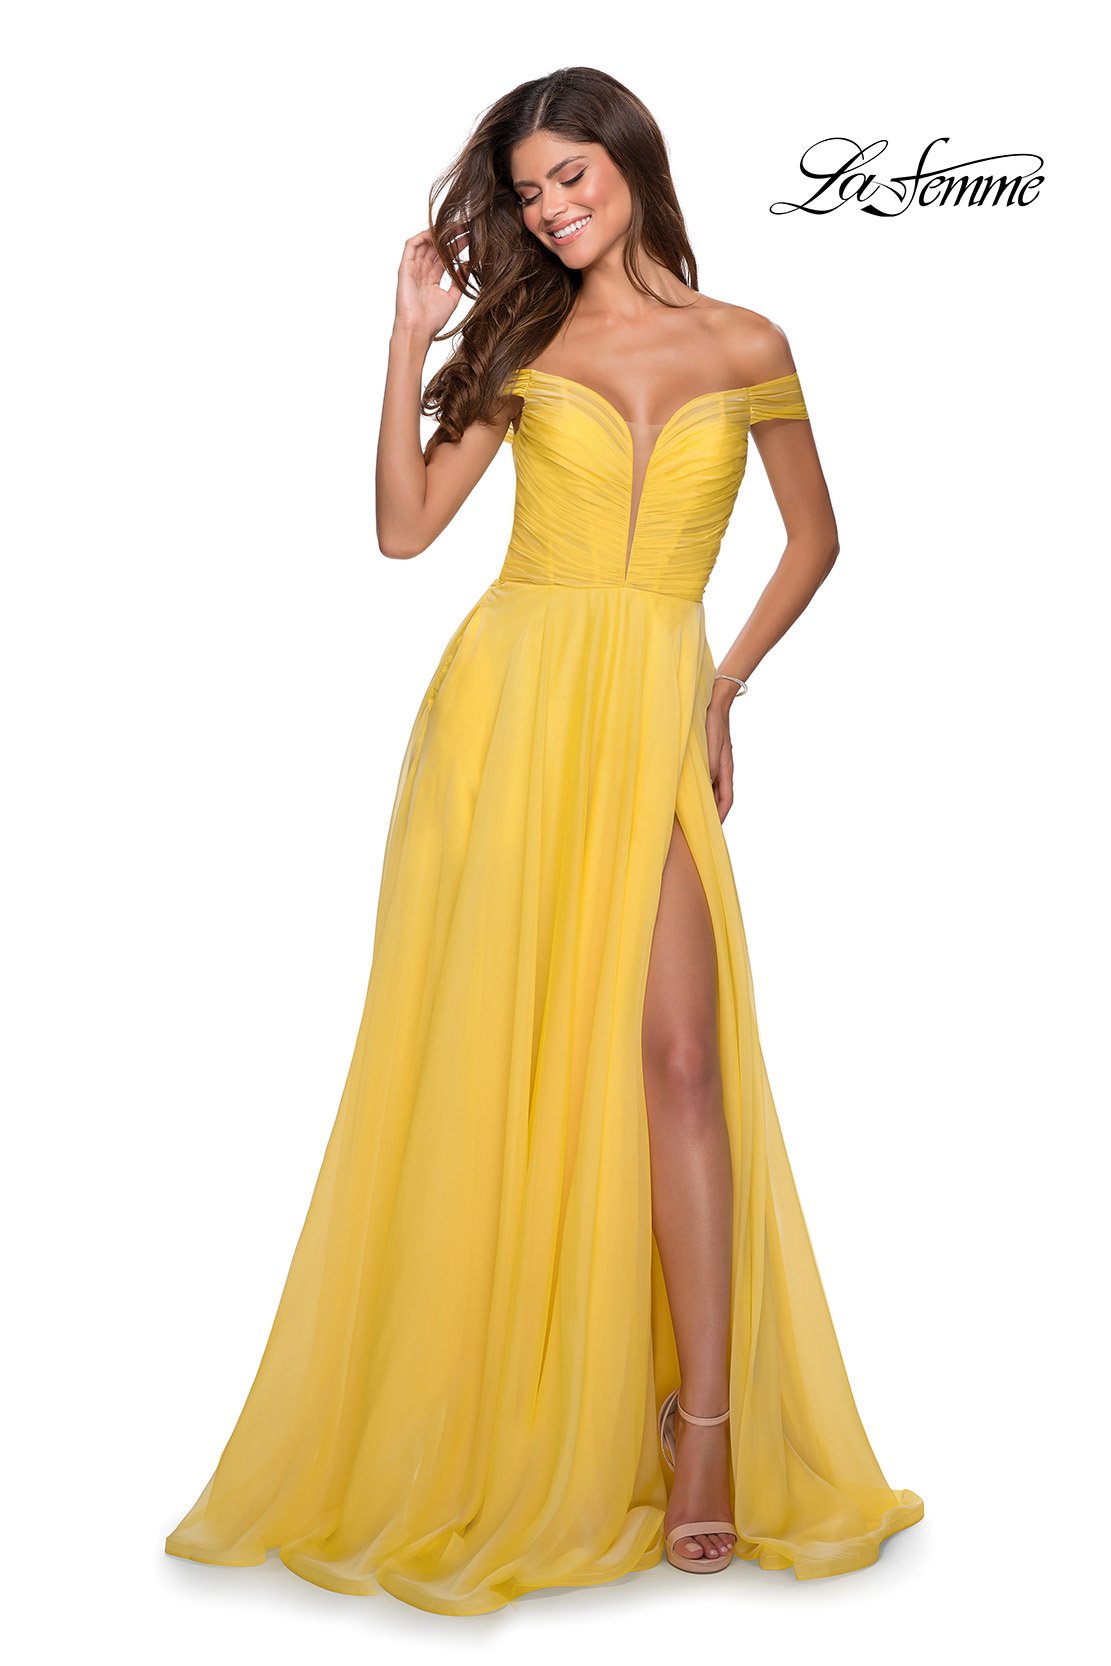 La Femme 28546 dress images in these colors: Red, Royal Blue, Yellow.